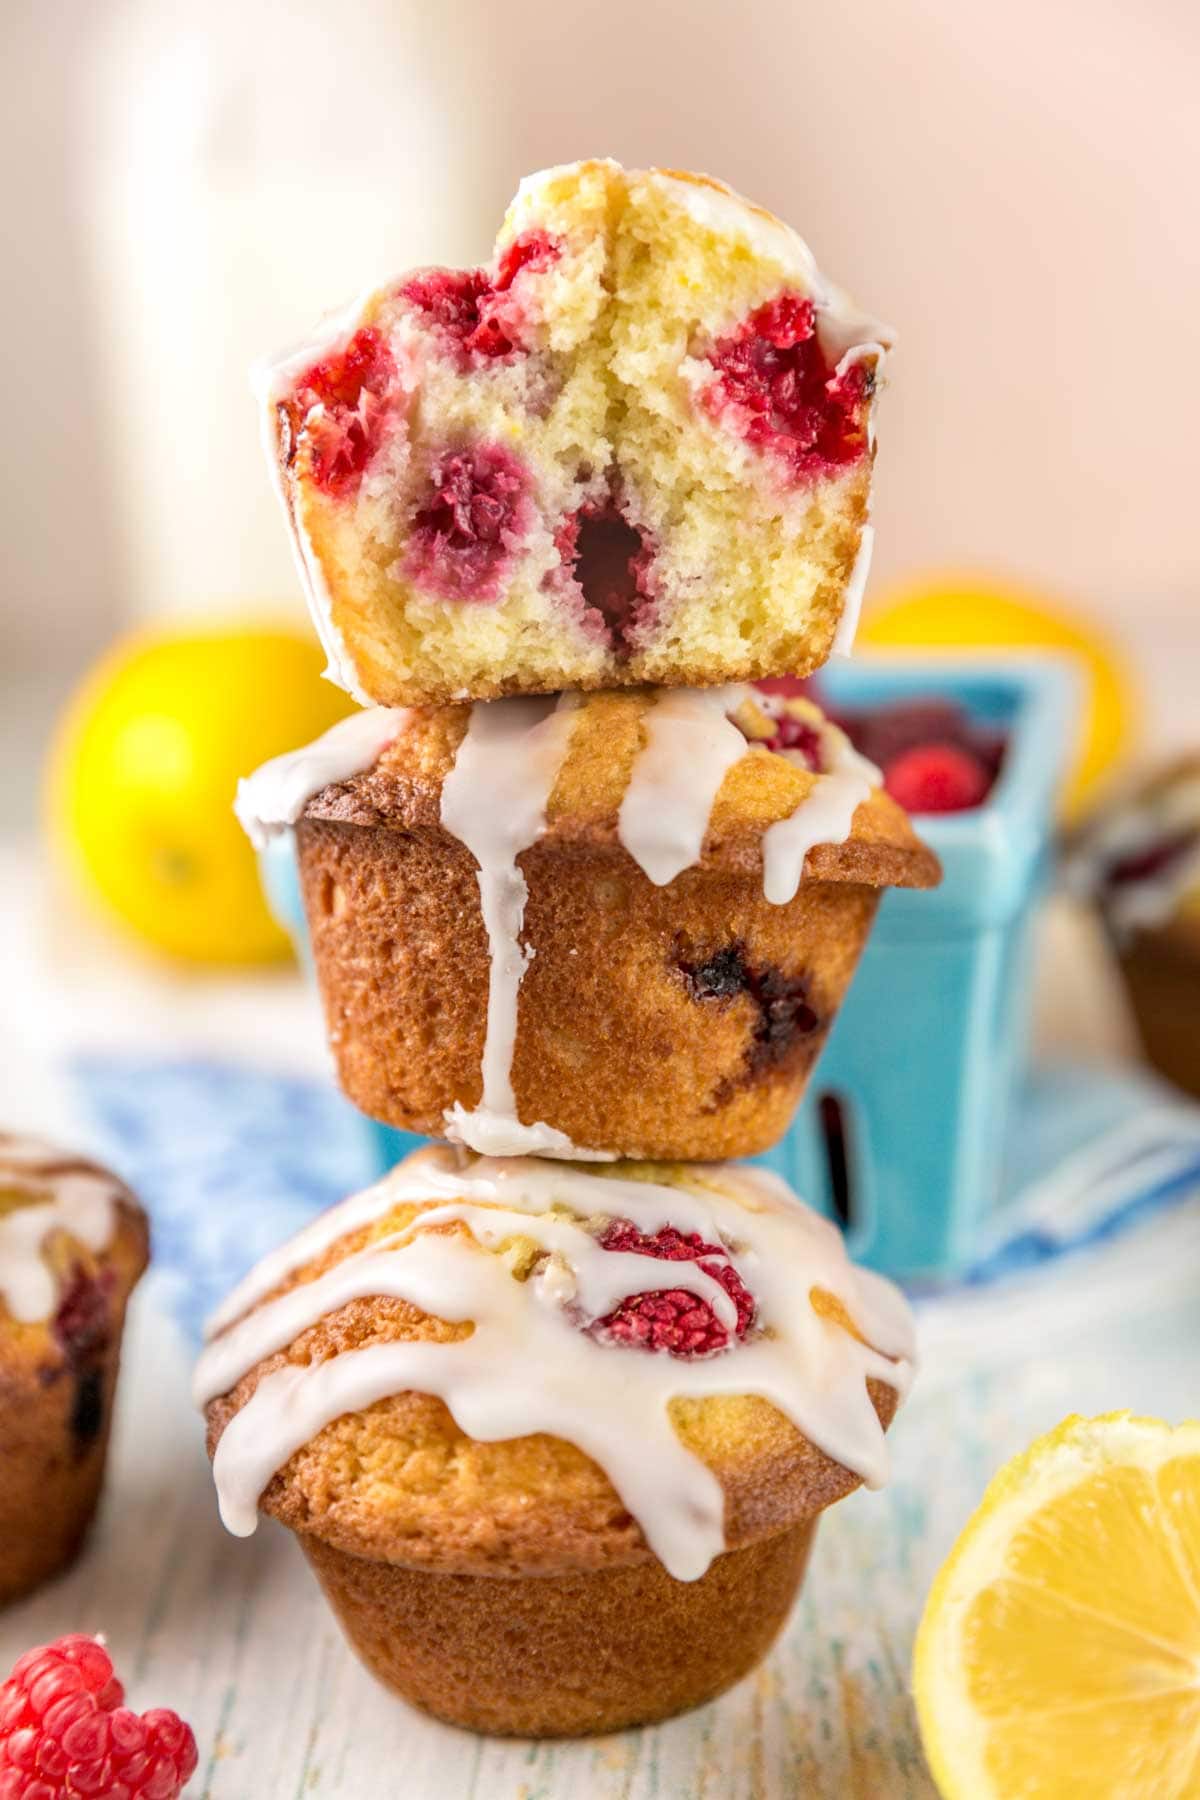 vertical stack of muffins with the top muffin cut in half showing the whole raspberries inside